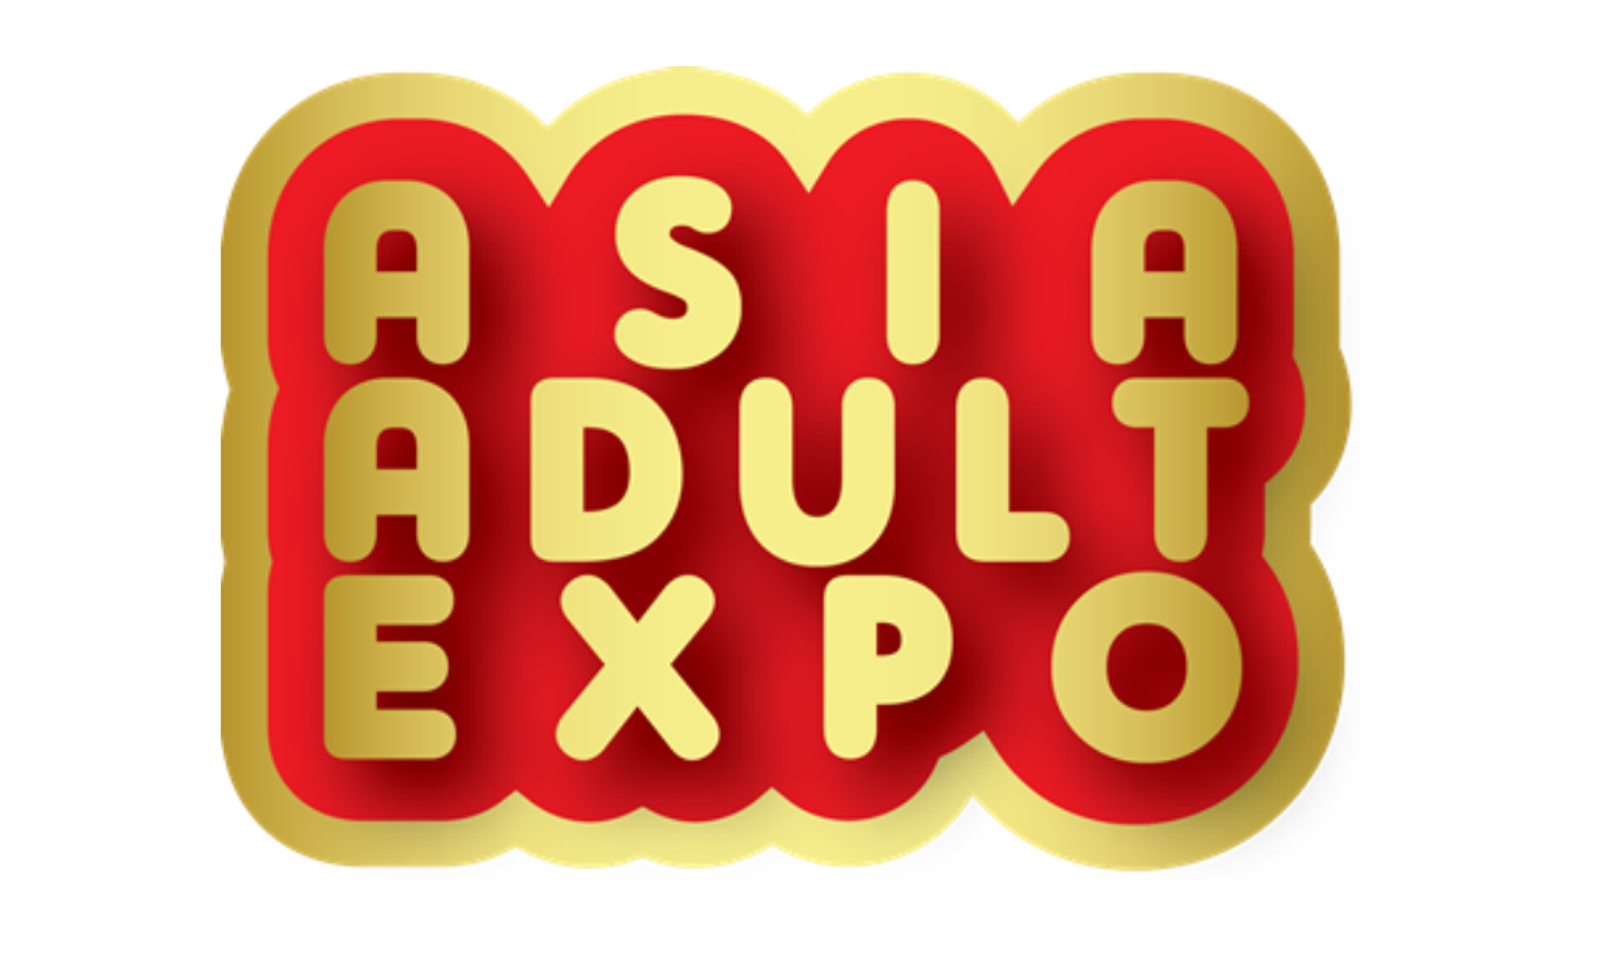 Asia Adult Expo Announces Location and Dates